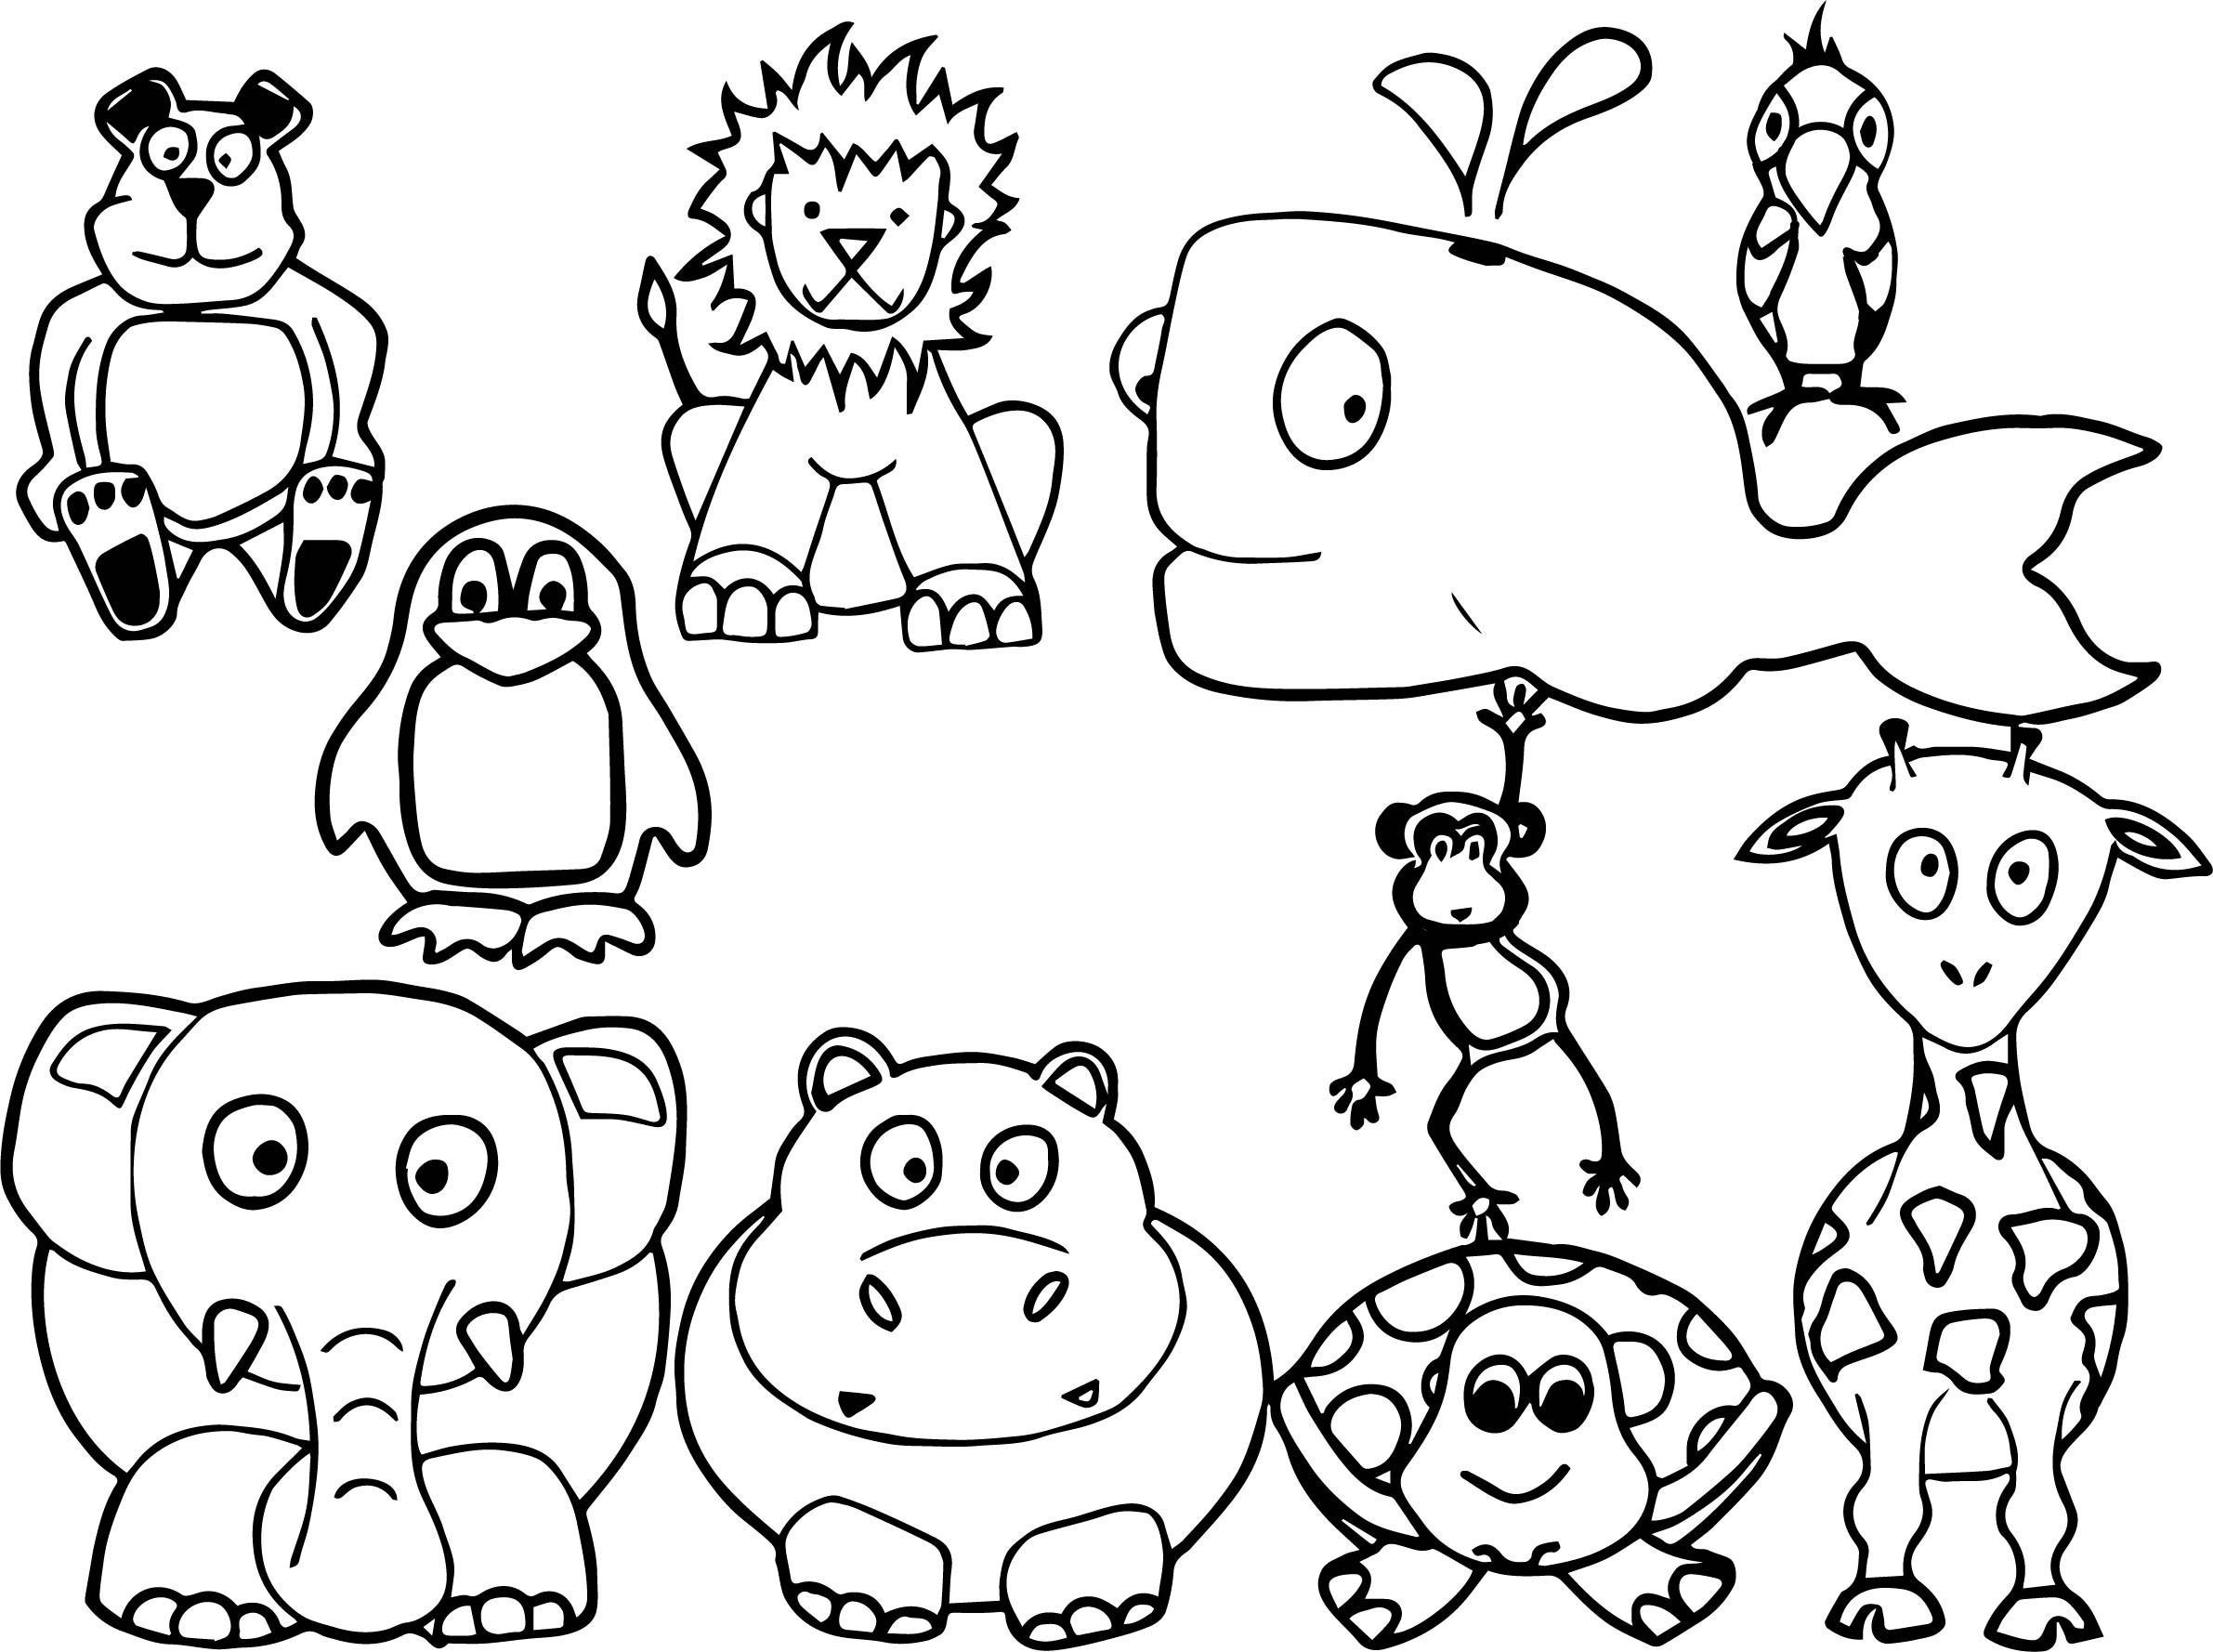 Coloring Pages Of Animals For Kids
 Animal Coloring Pages Best Coloring Pages For Kids